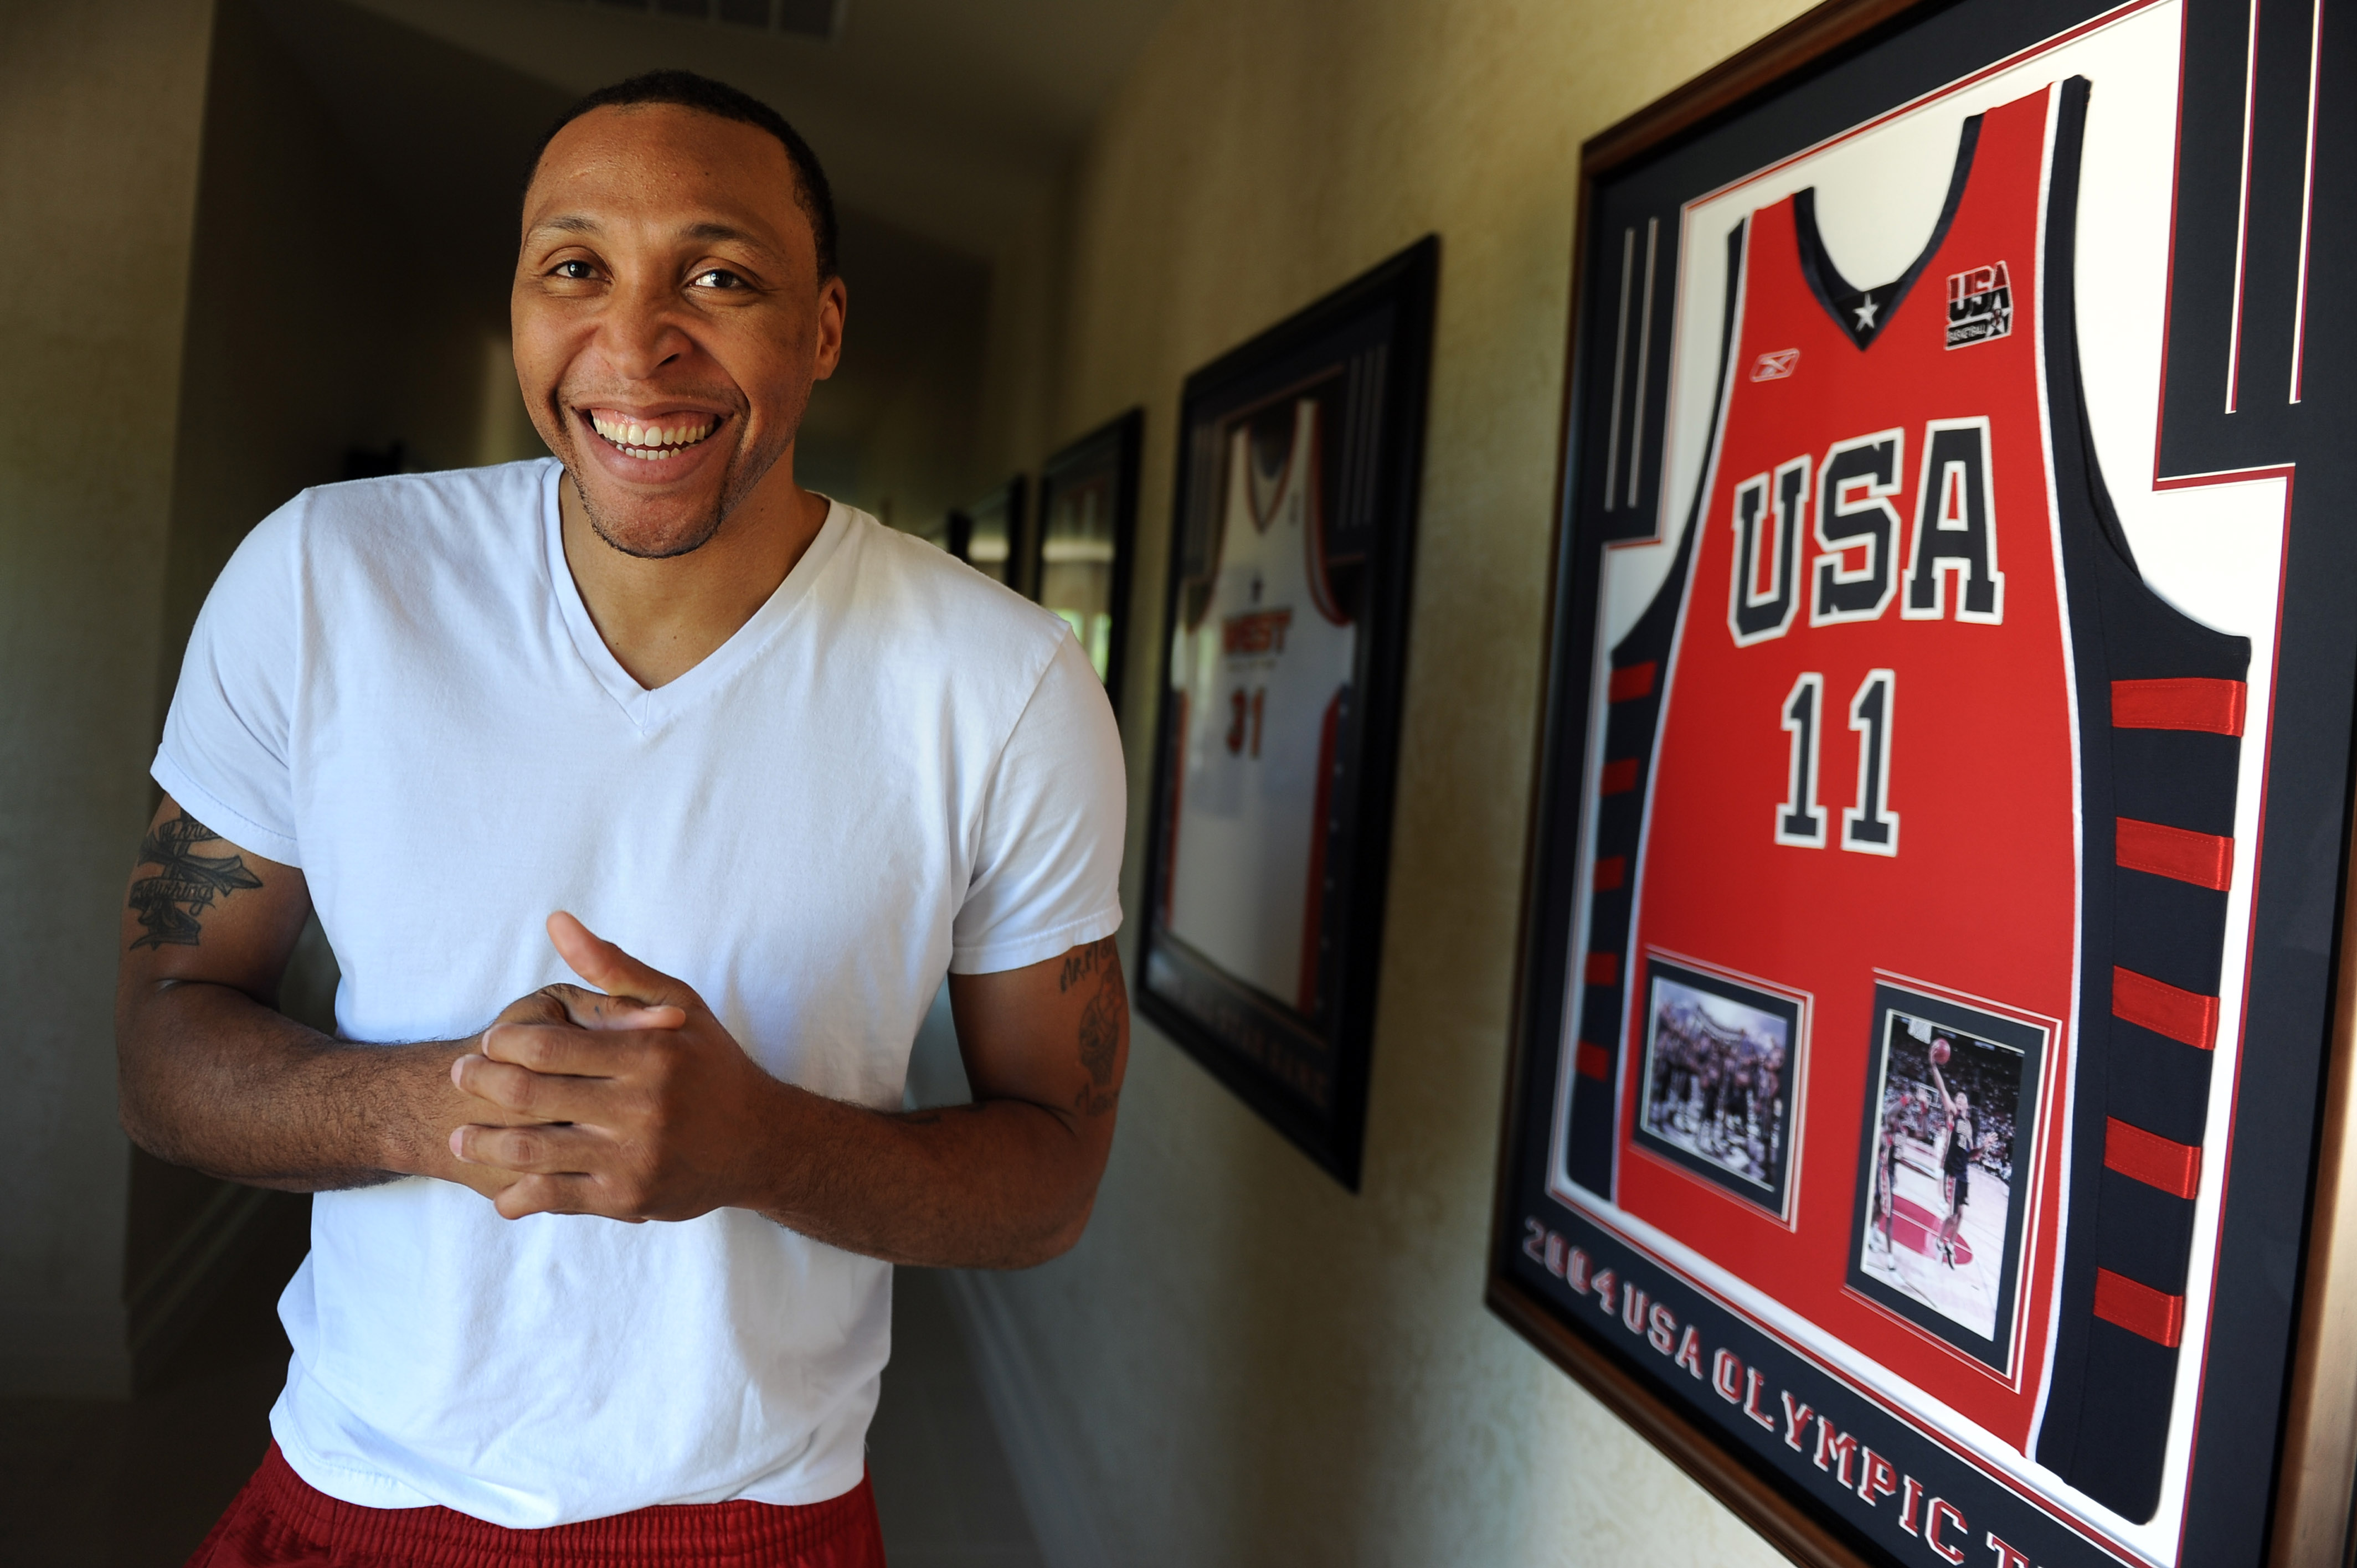 Houses Gardens People: At Home with Mavericks Player Shawn Marion